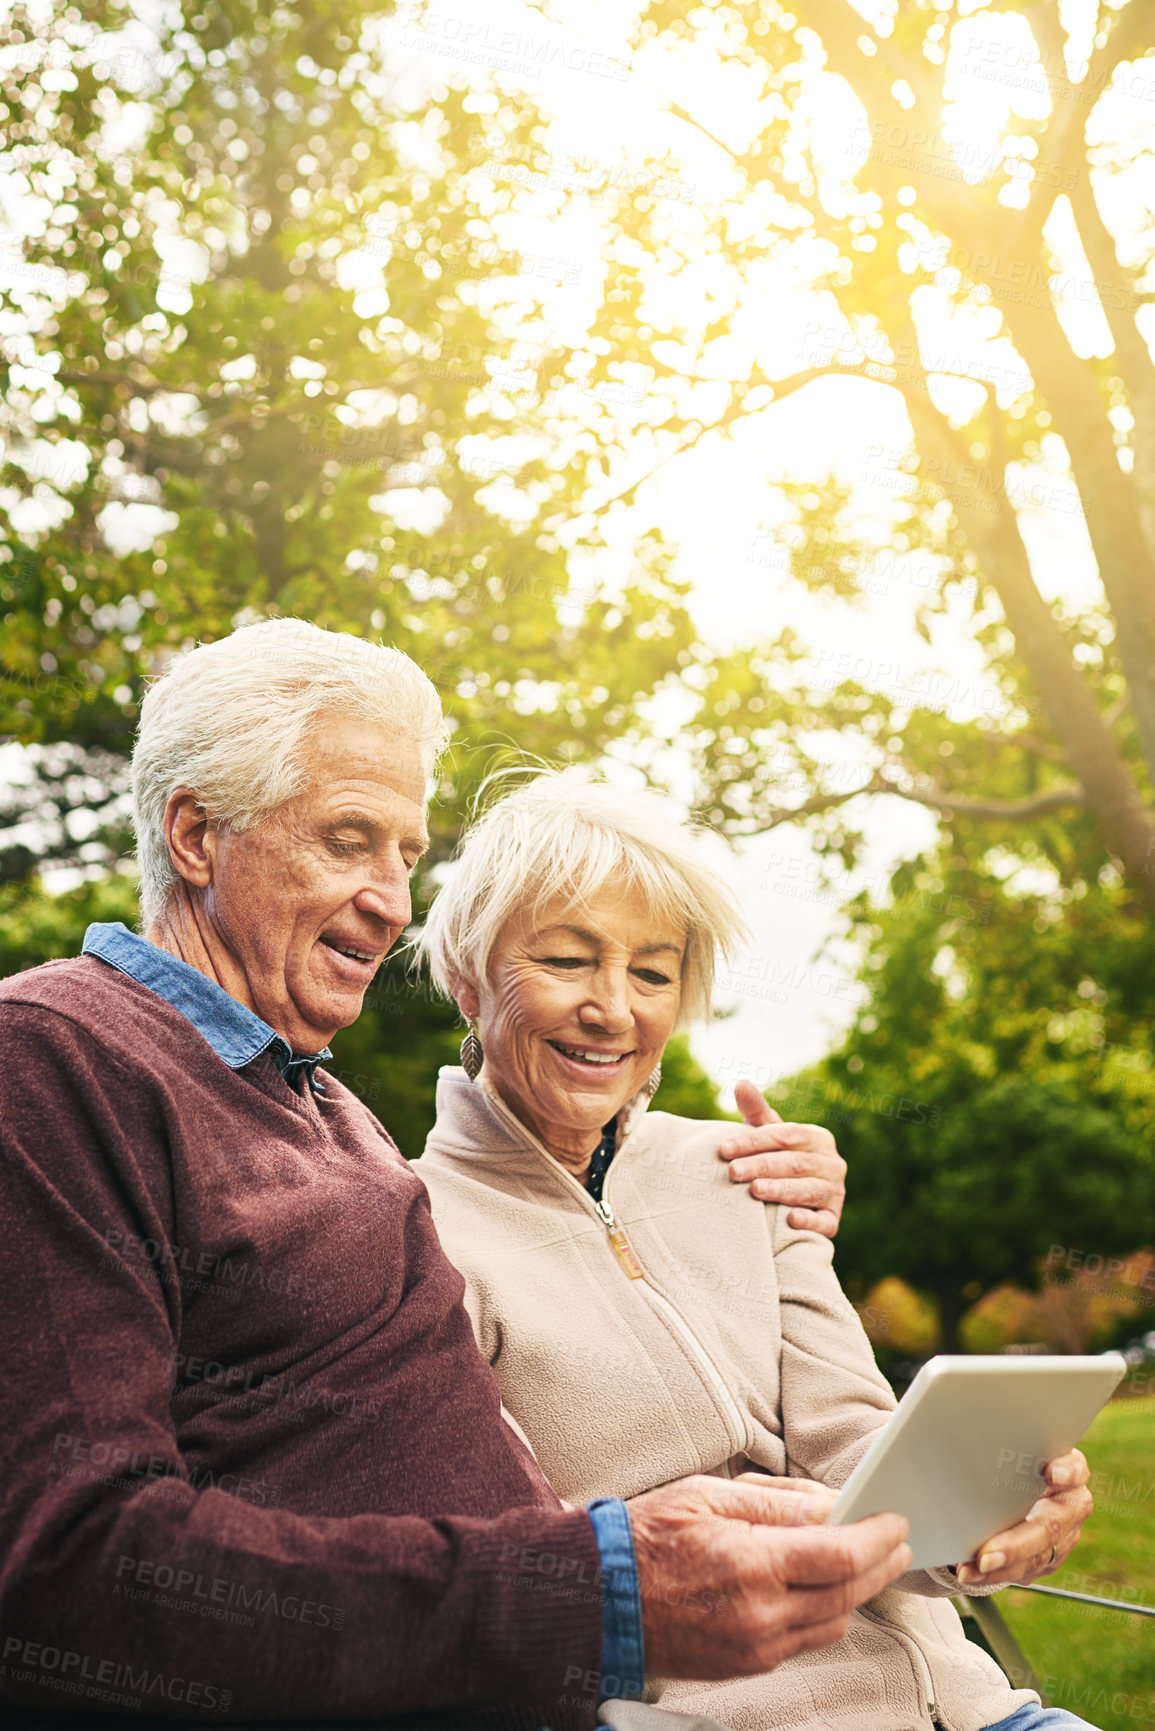 Buy stock photo Shot of a senior couple using a digital tablet together in the park